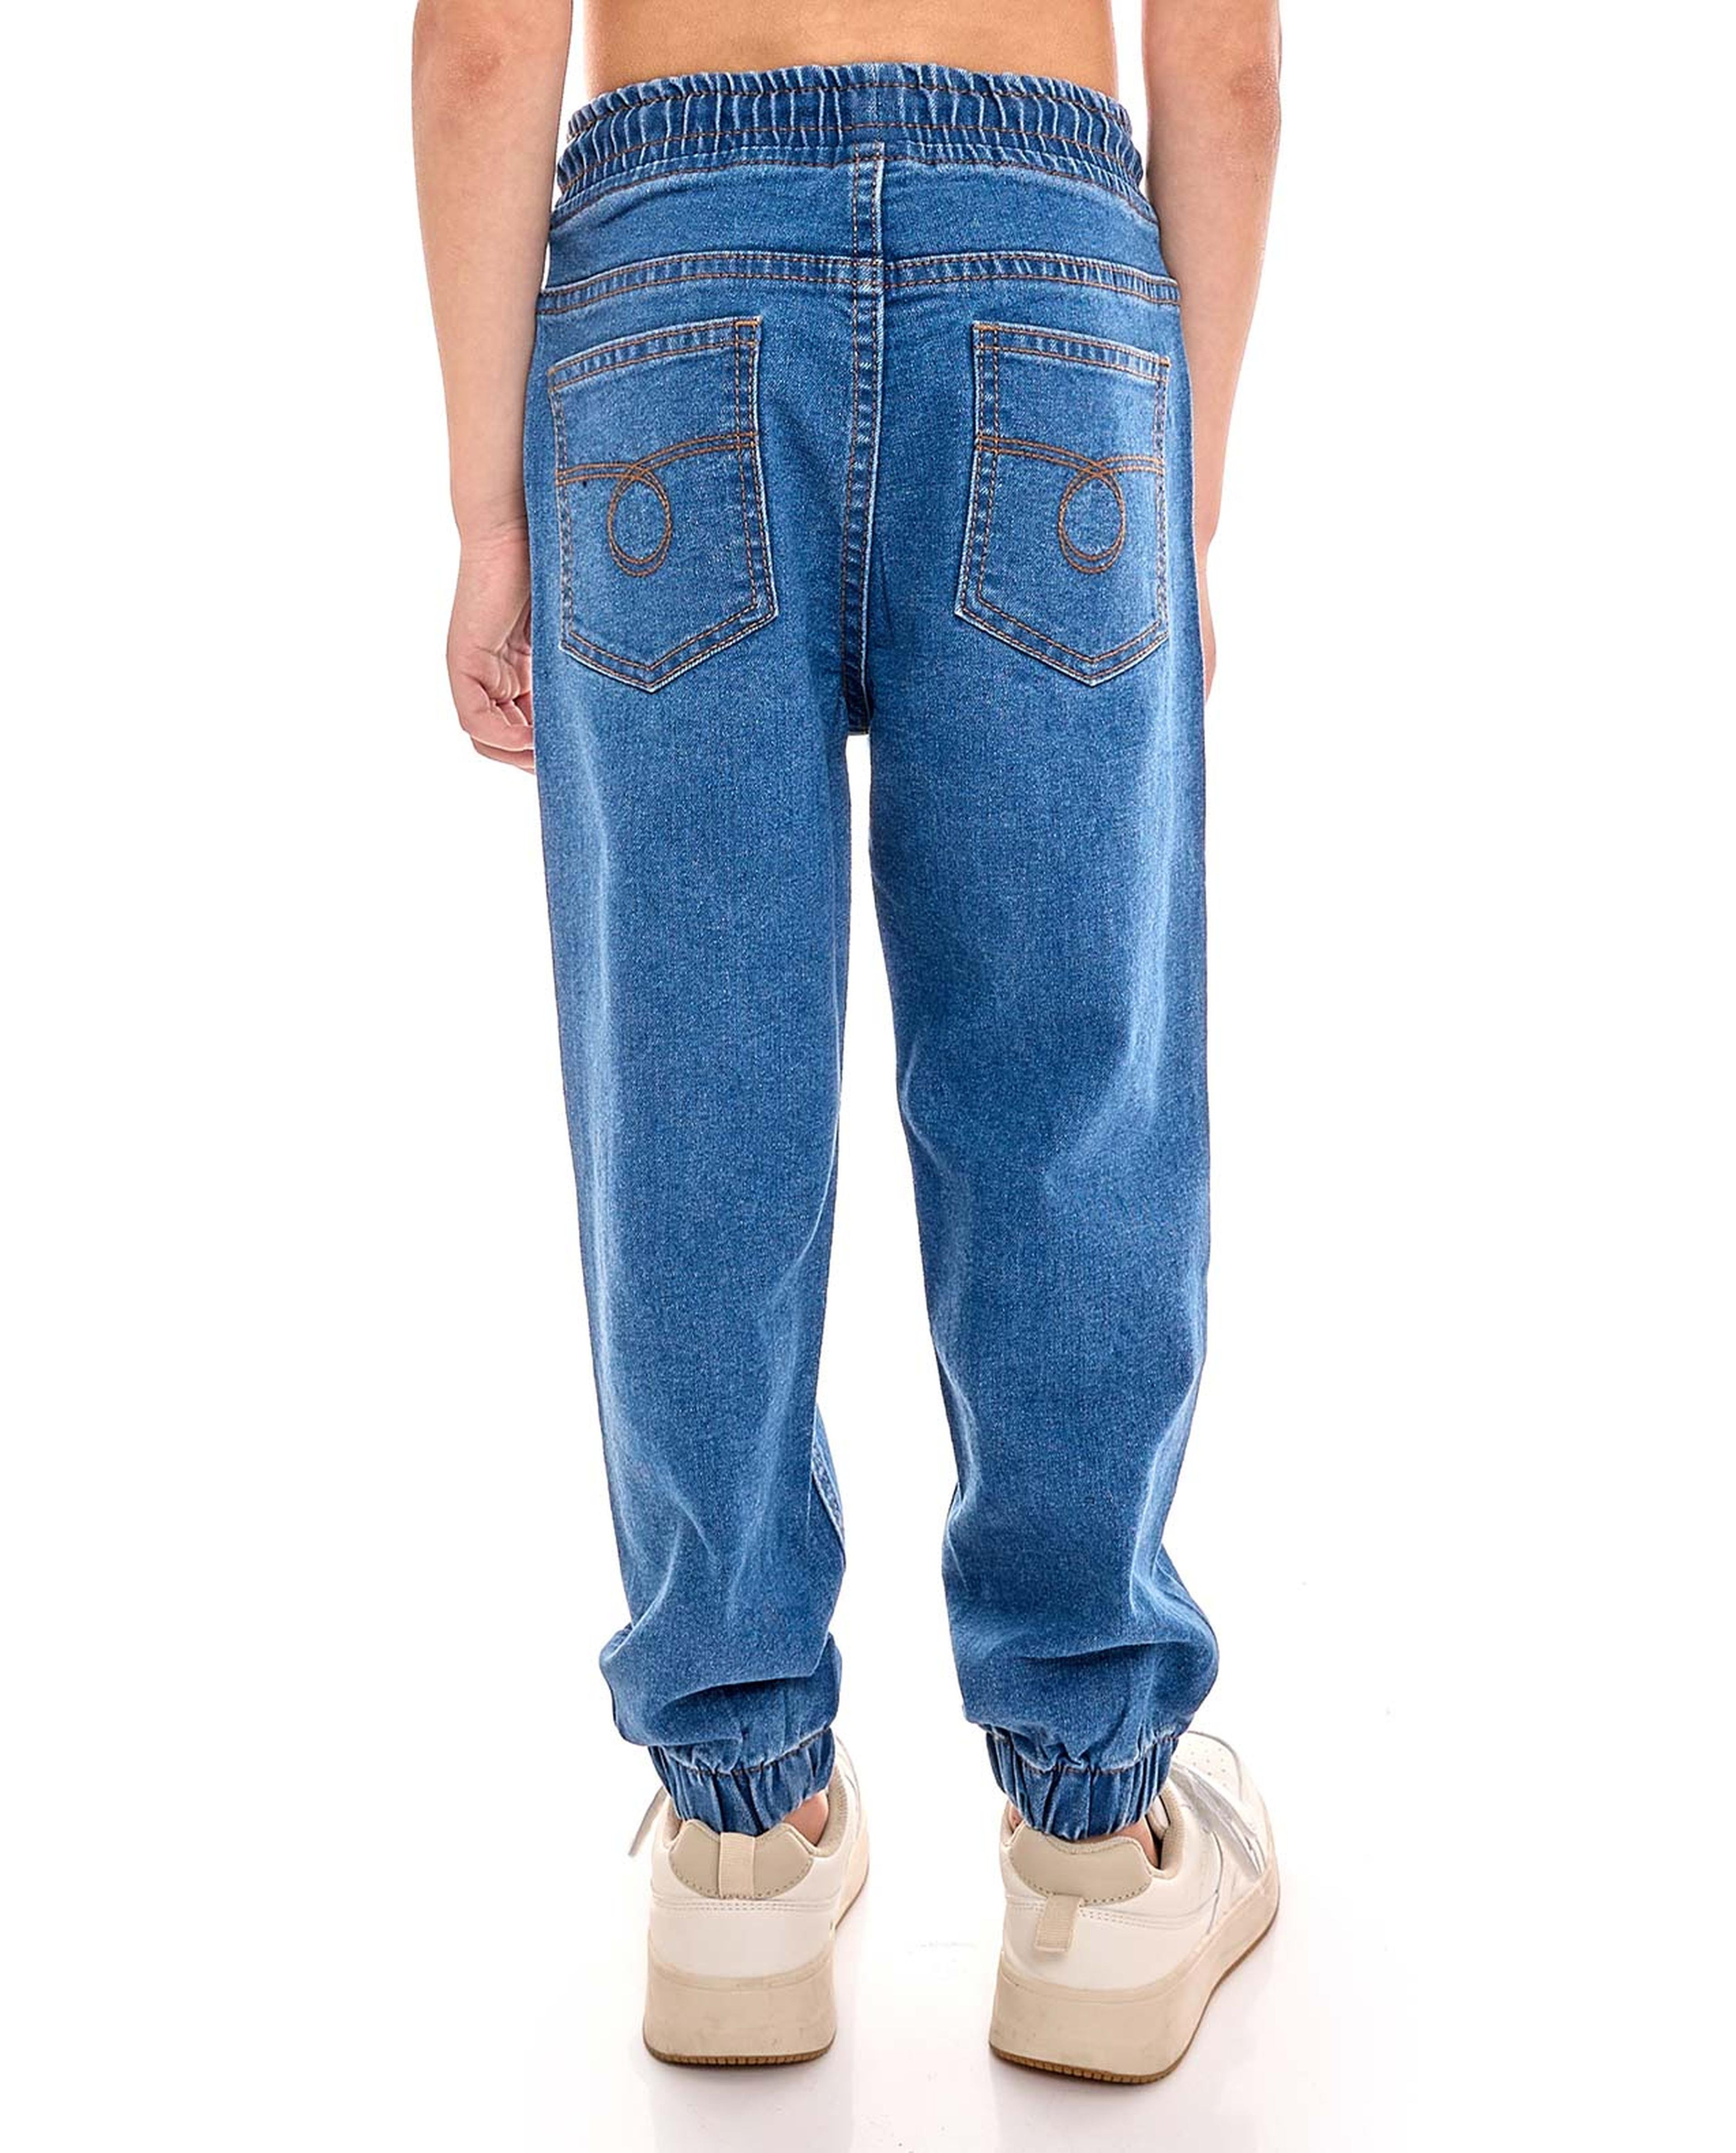 Washed Jogger Jeans with Drawstring Waist